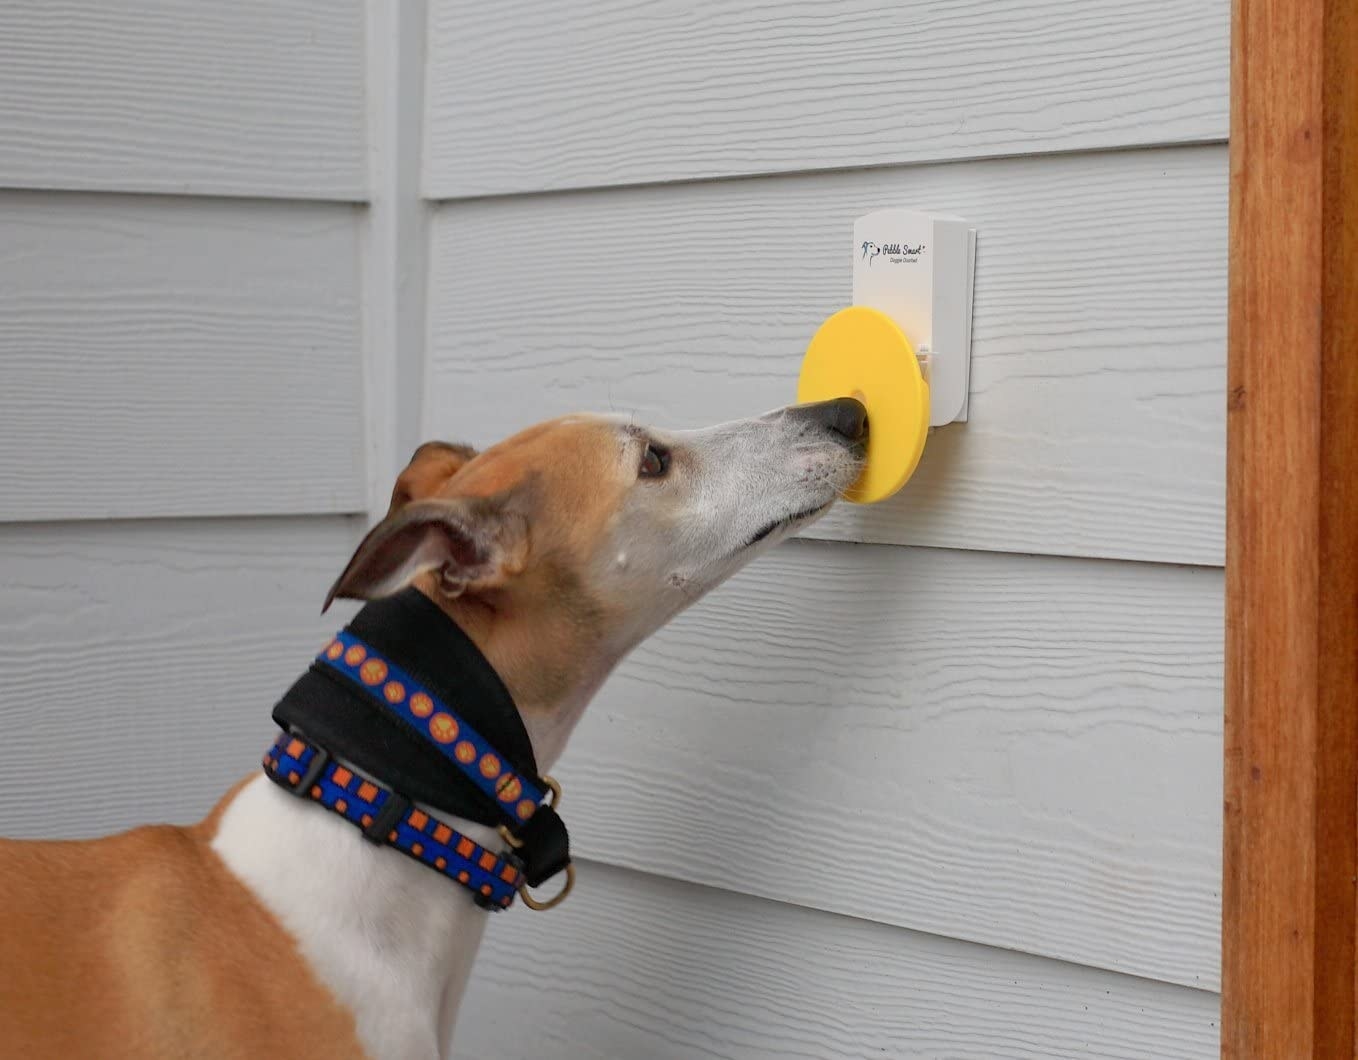 A dog ringing the dog doorbell with their nose